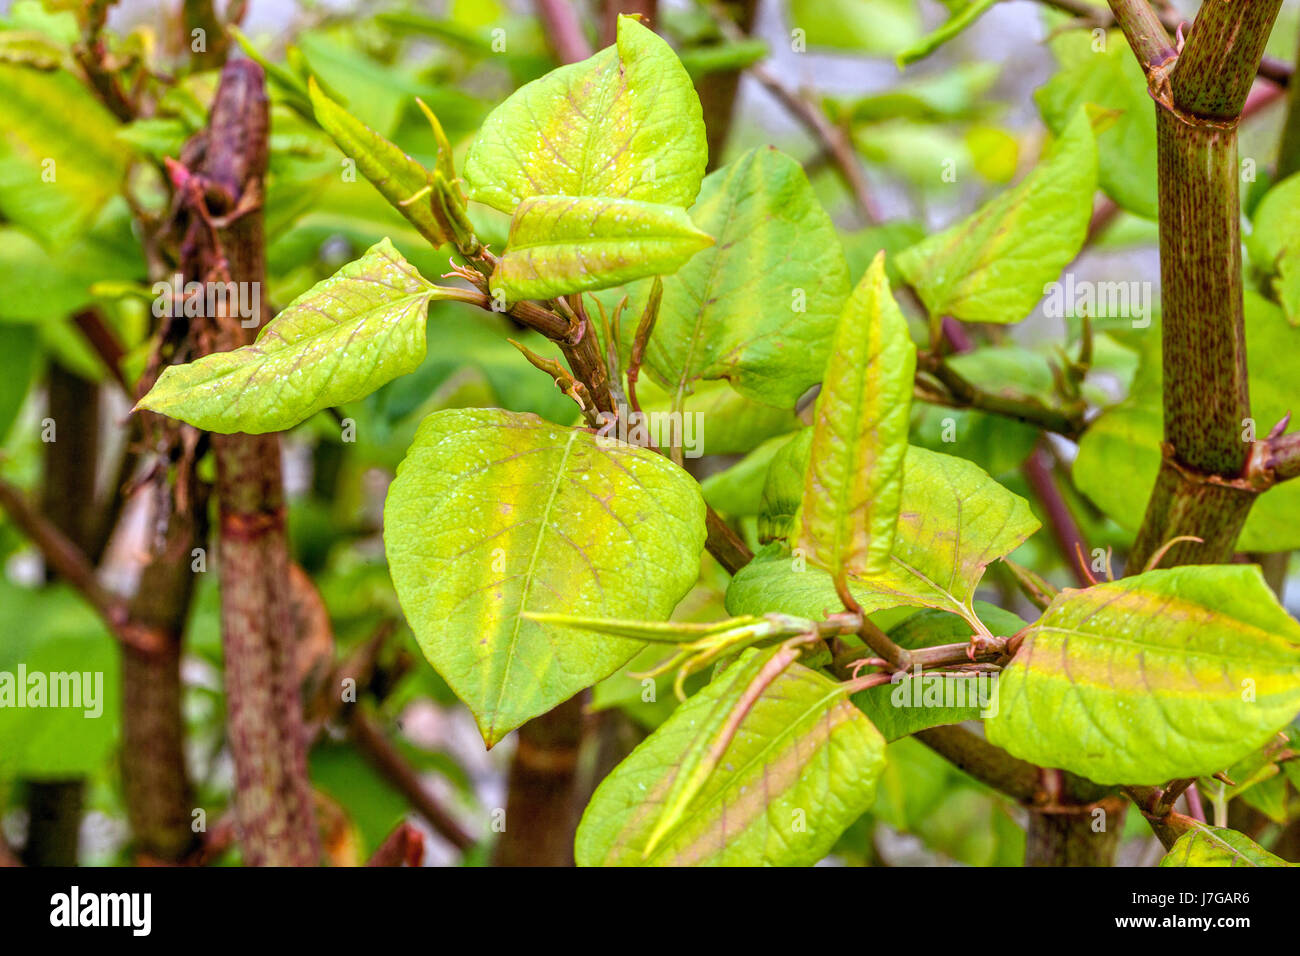 Japanese Knotweed, Fallopia japonica Reynoutria japonica, young leaves Stock Photo